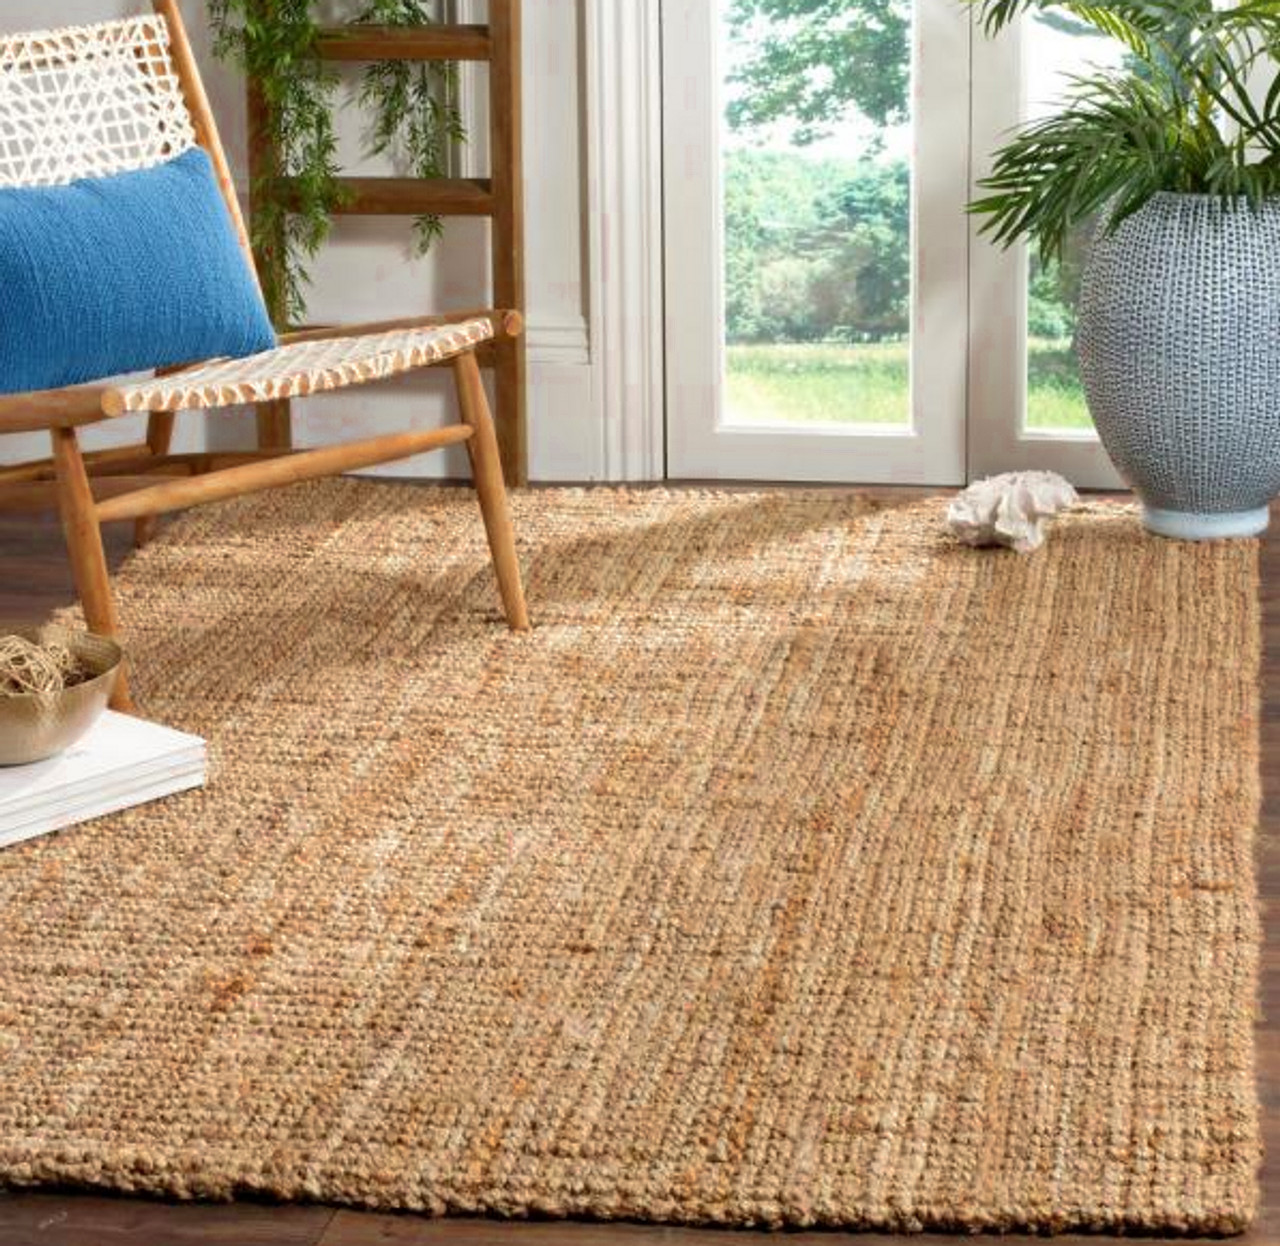 Square Handwoven Indian Jute Rug